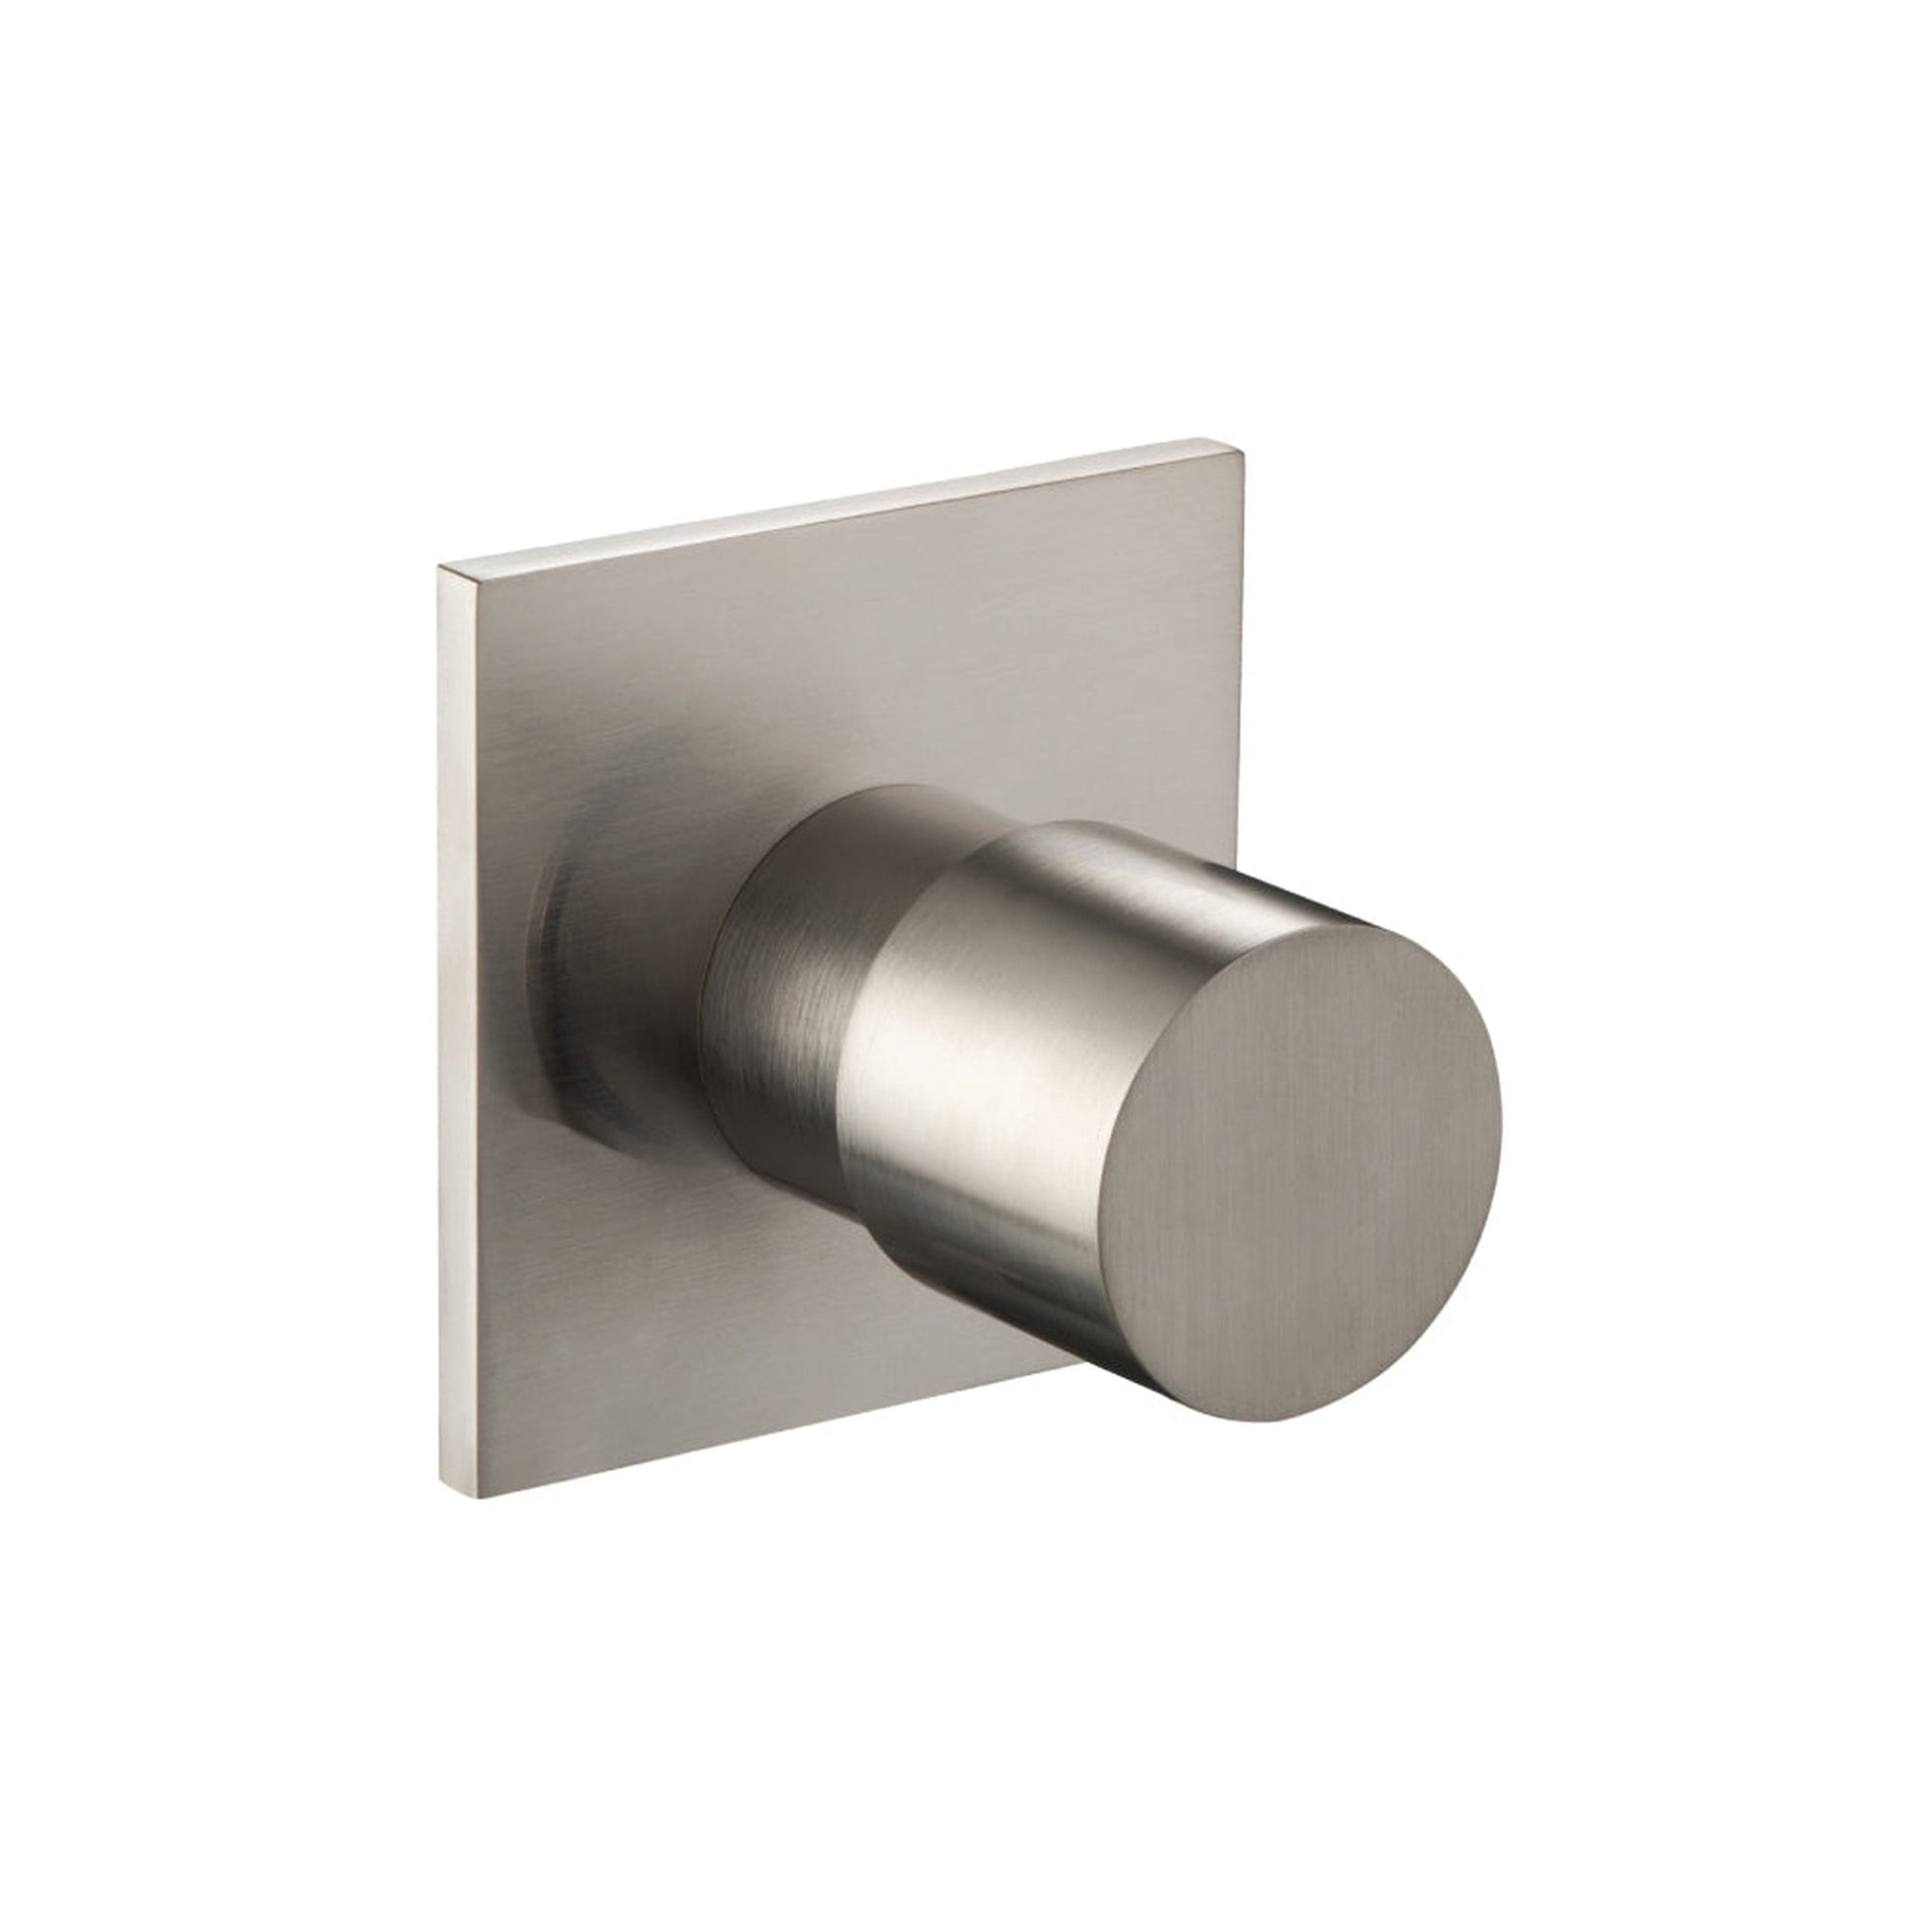 Isenberg Serie 100 3" Brushed Nickel PVD Wall Mounted Volume Control Shower Faucet Valve Trim